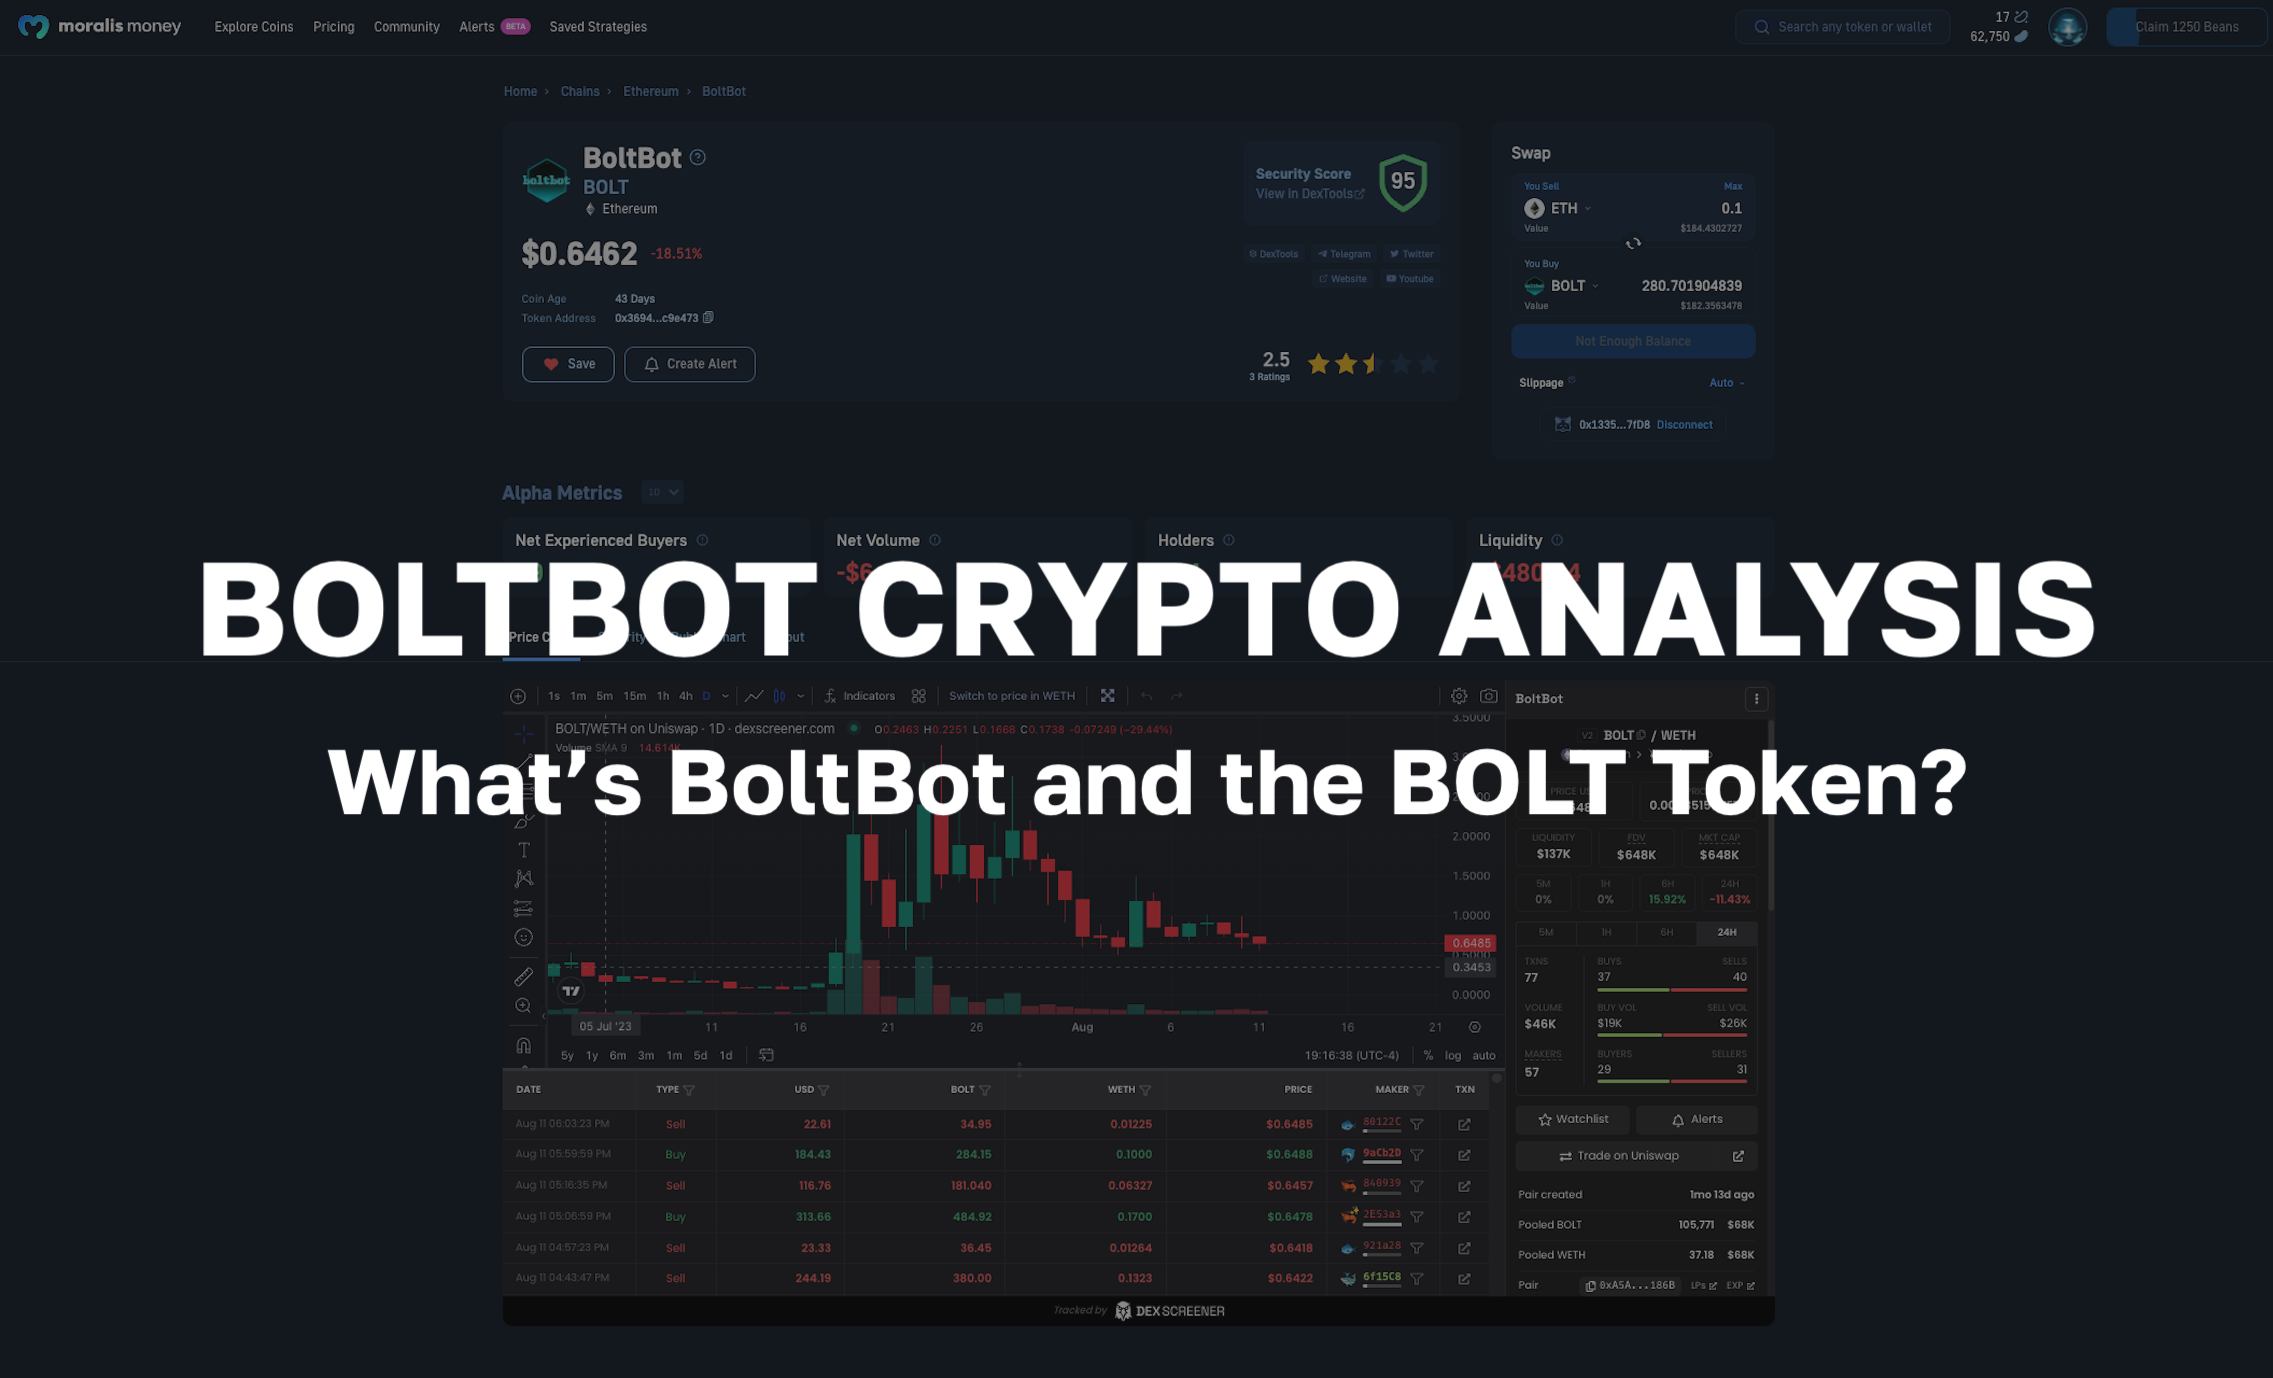 What's BoltBot and the BOLT Token? Full BoltBot Crypto Analysis